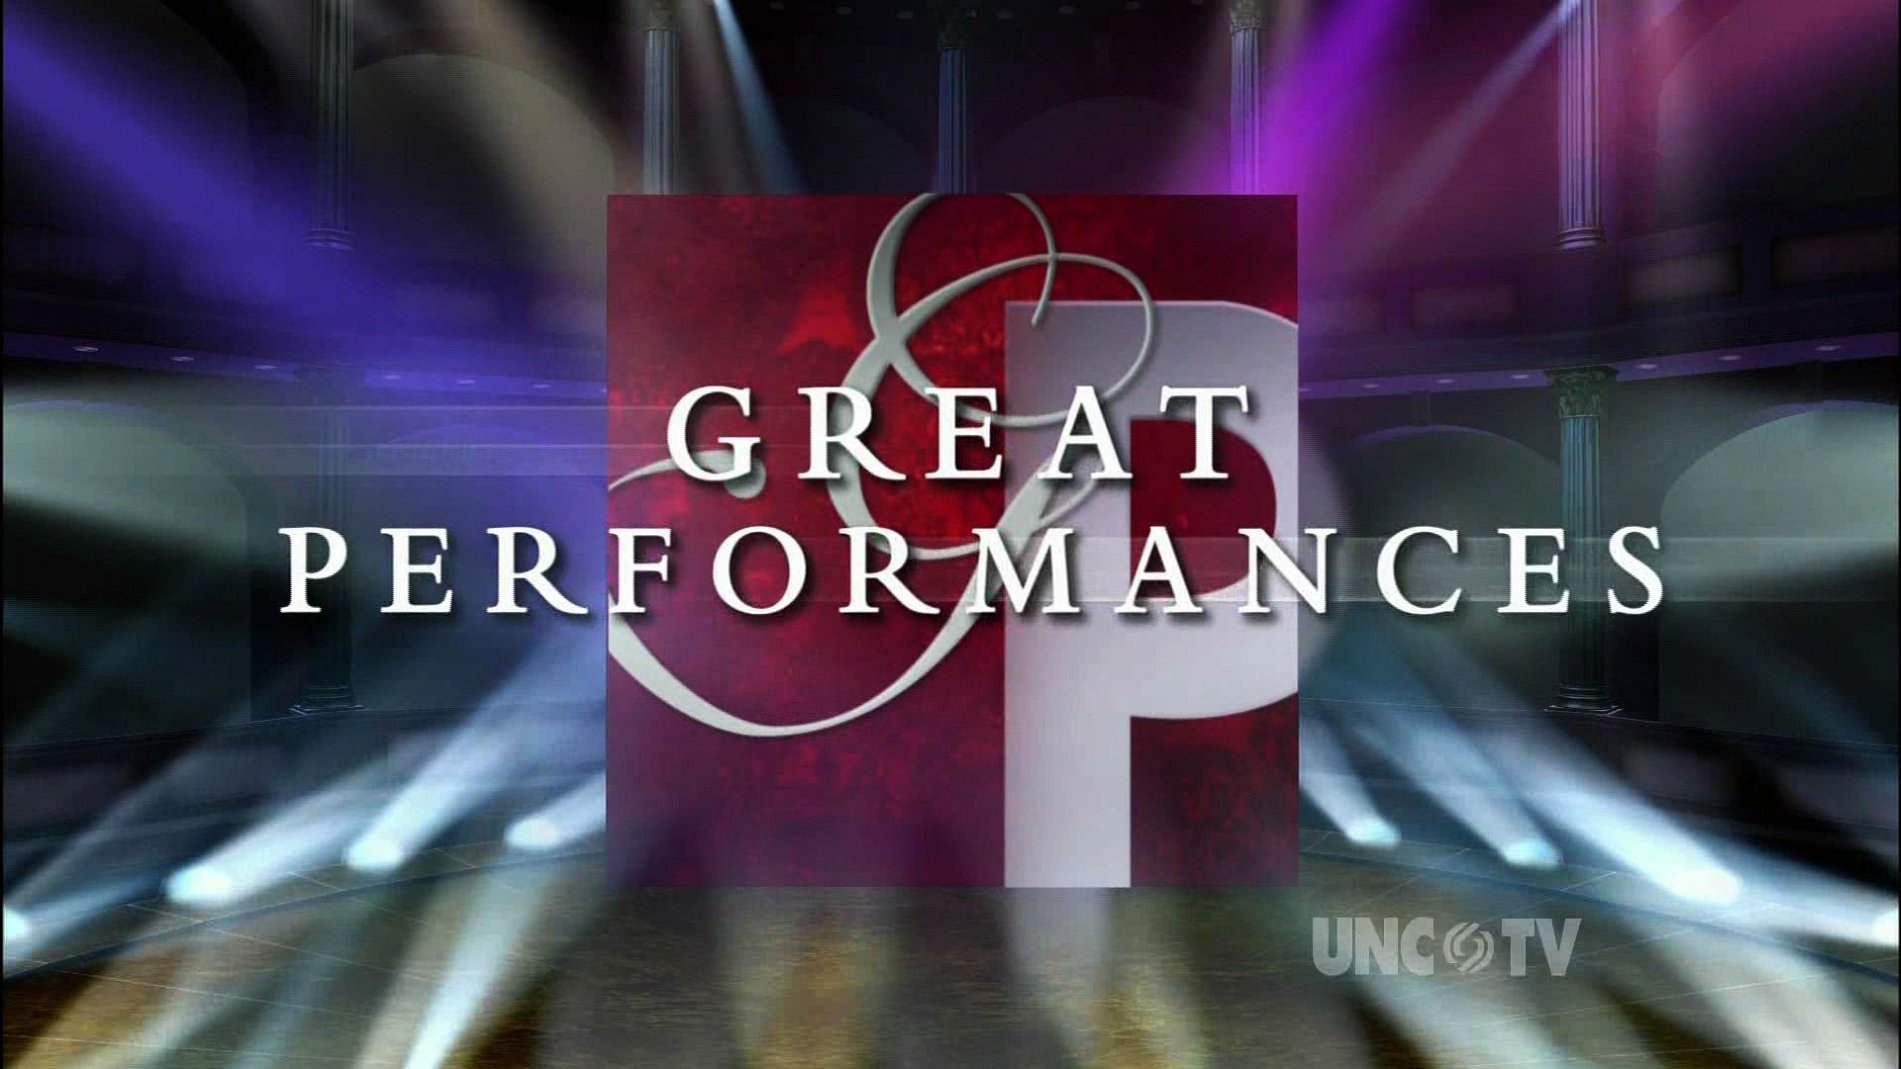 What Time Does 'Great Performances' Come On Tonight?